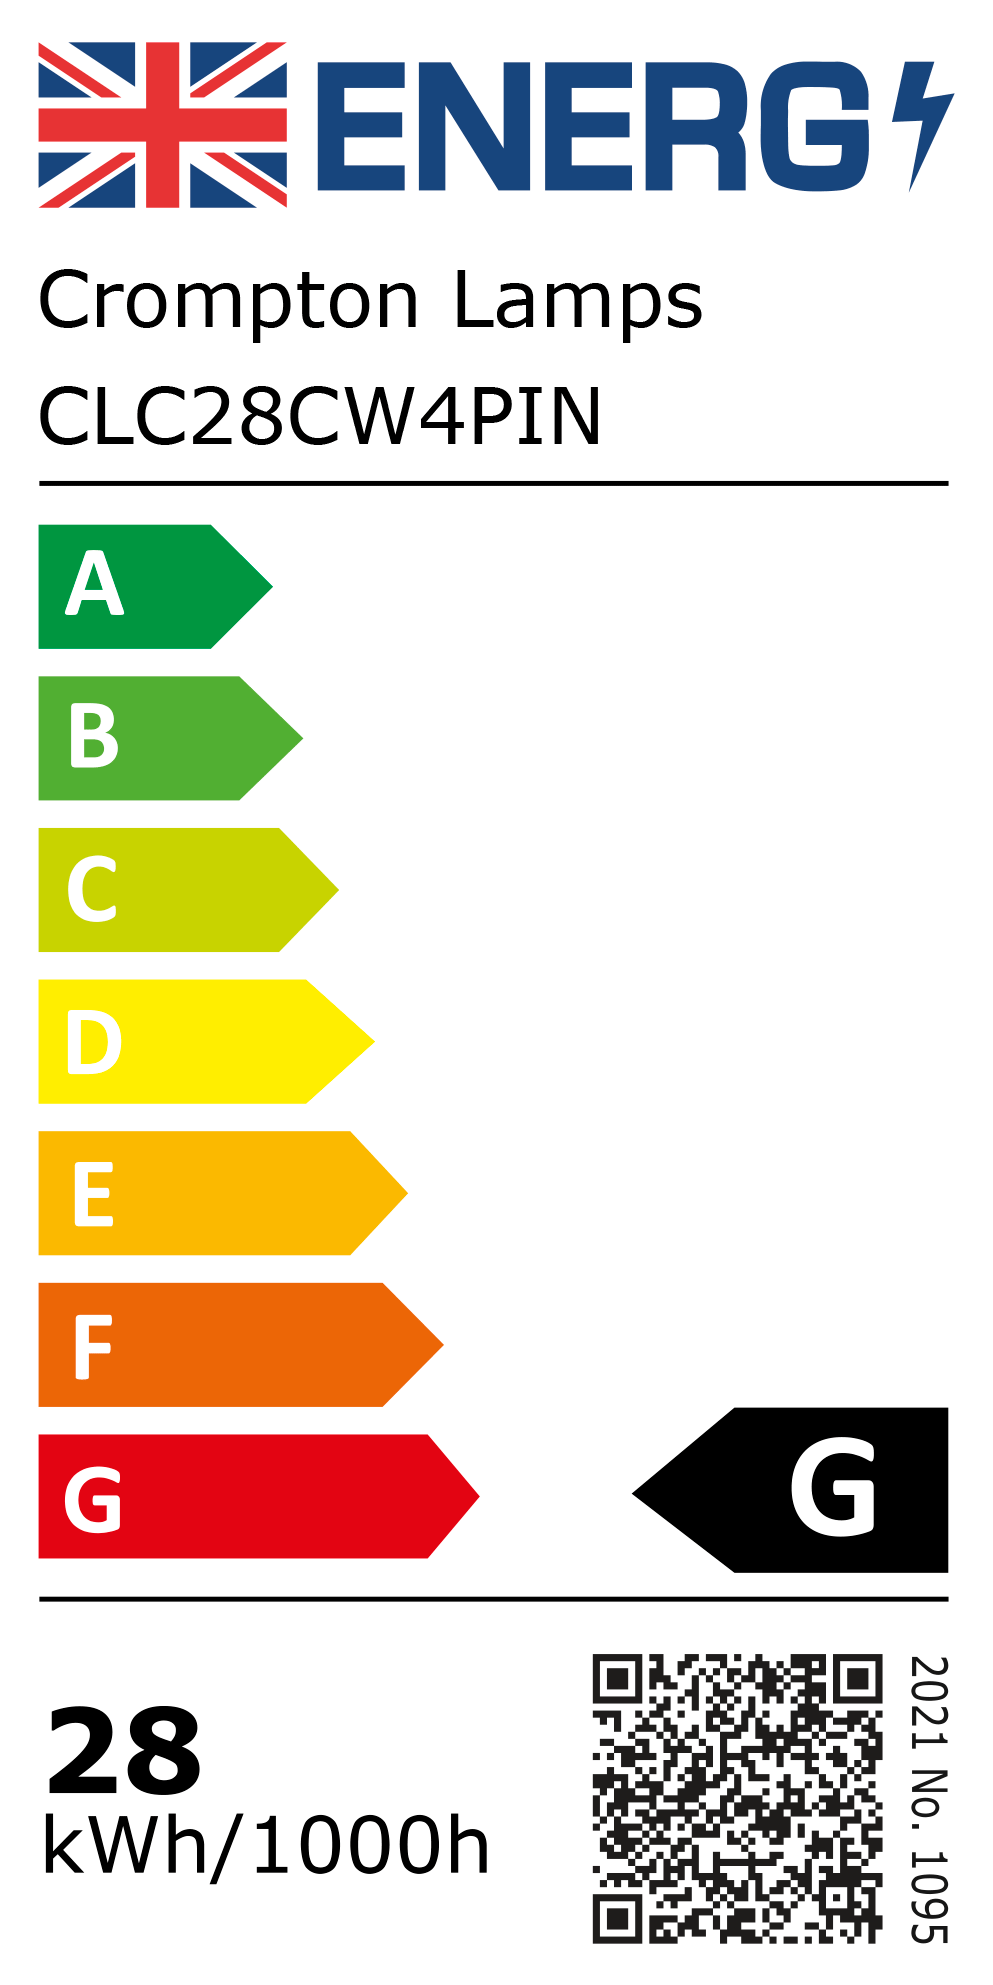 New 2021 Energy Rating Label: Stock Code CLC28CW4PIN